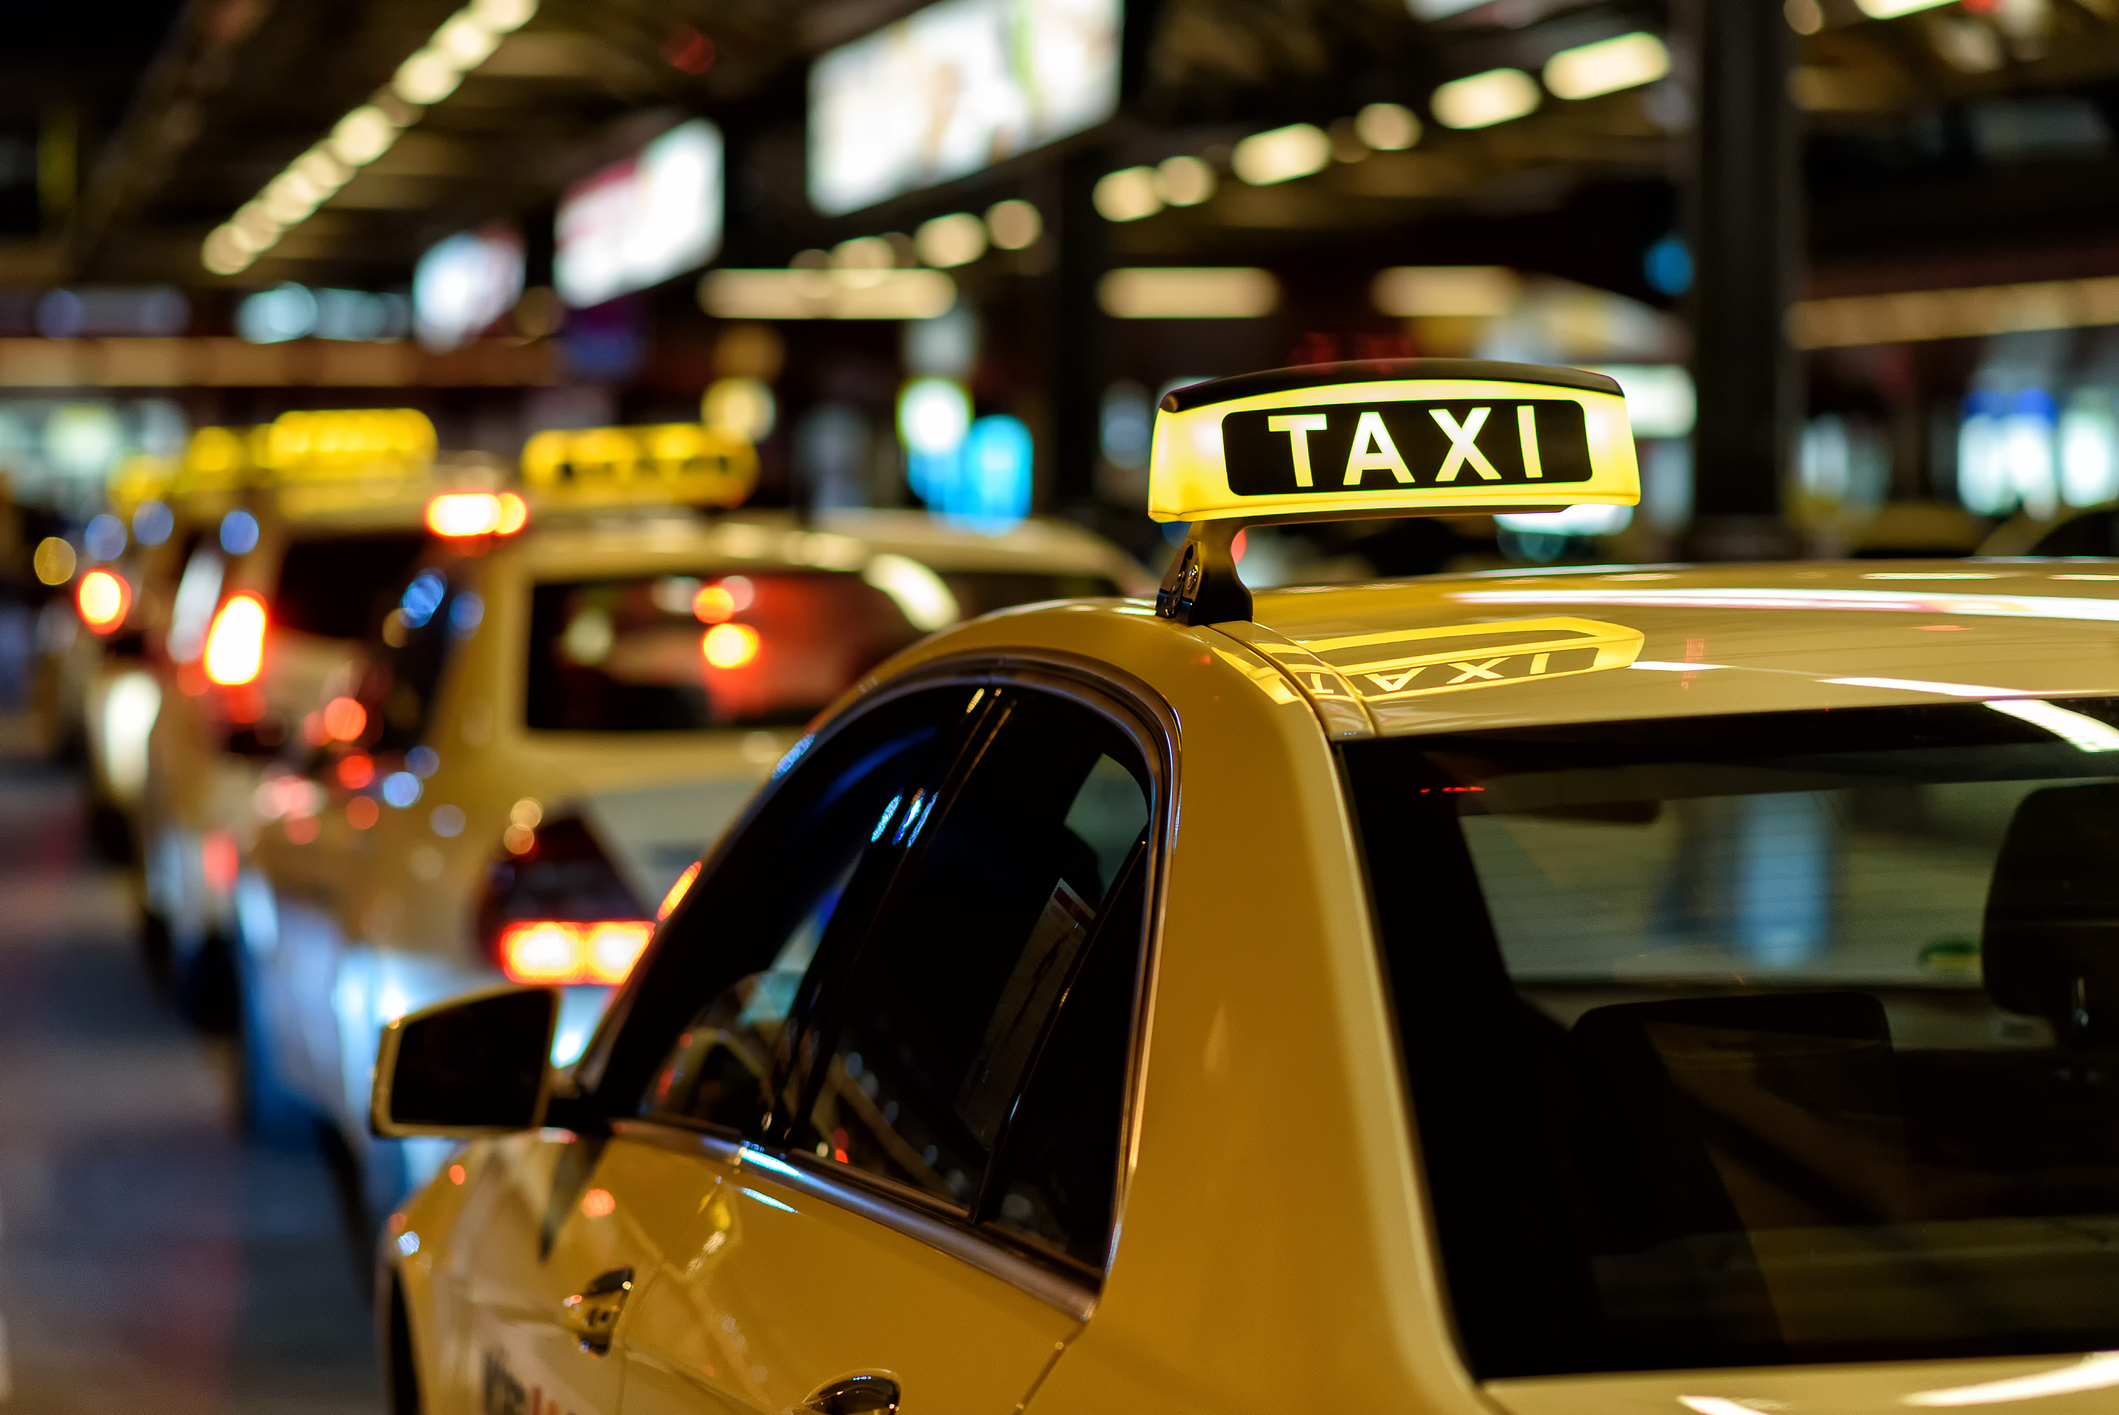 How Can Mangage Taxi Fare From Makkah to Madinah?